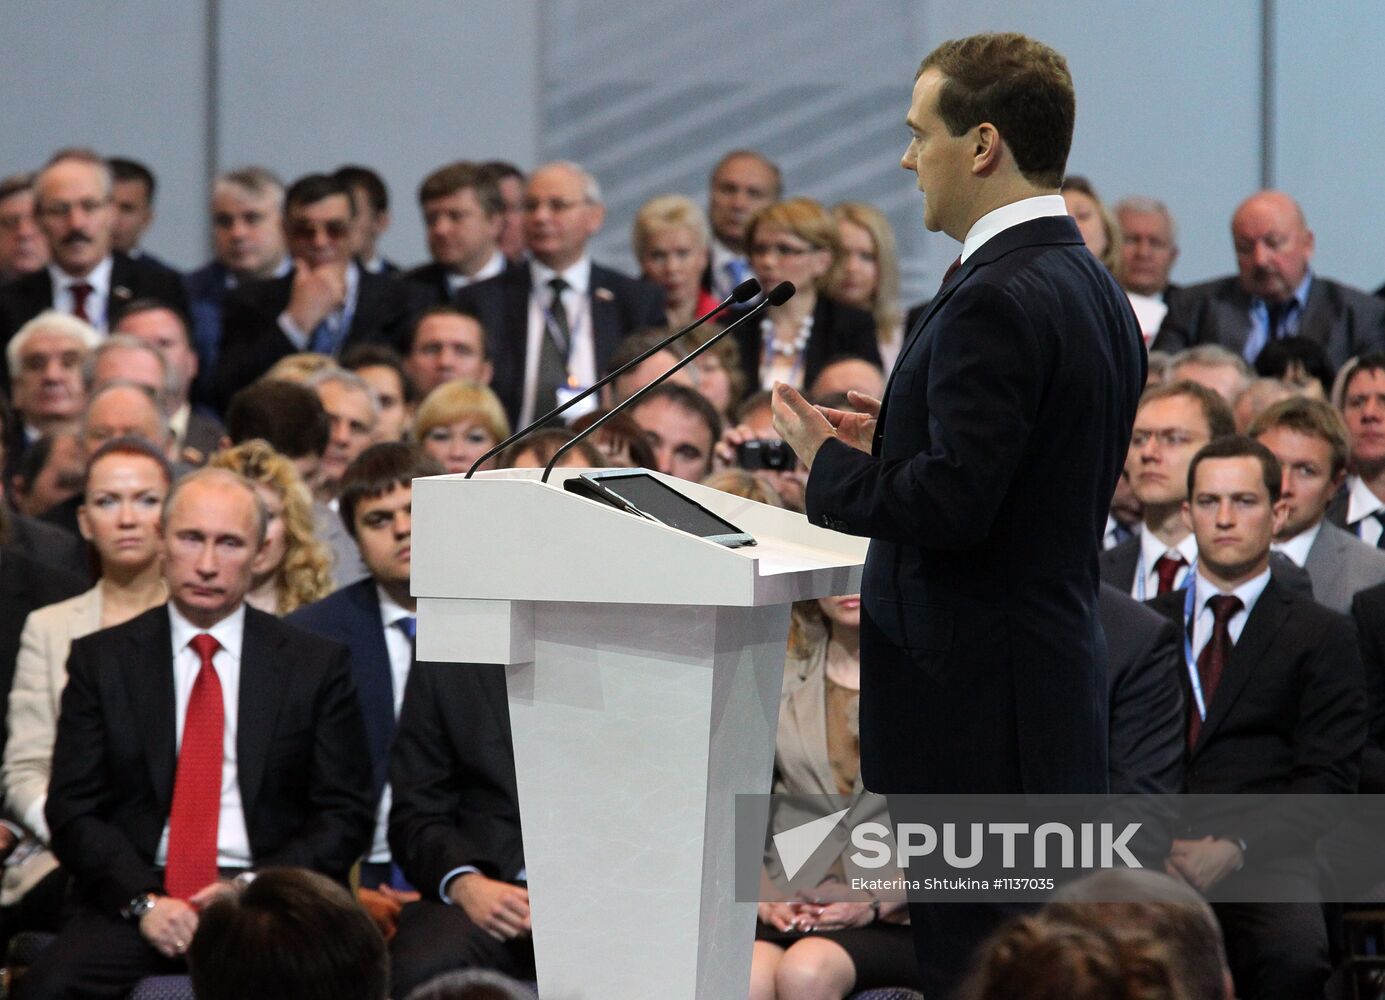 Dmitry Medvedev at the 13th United Russia party conference